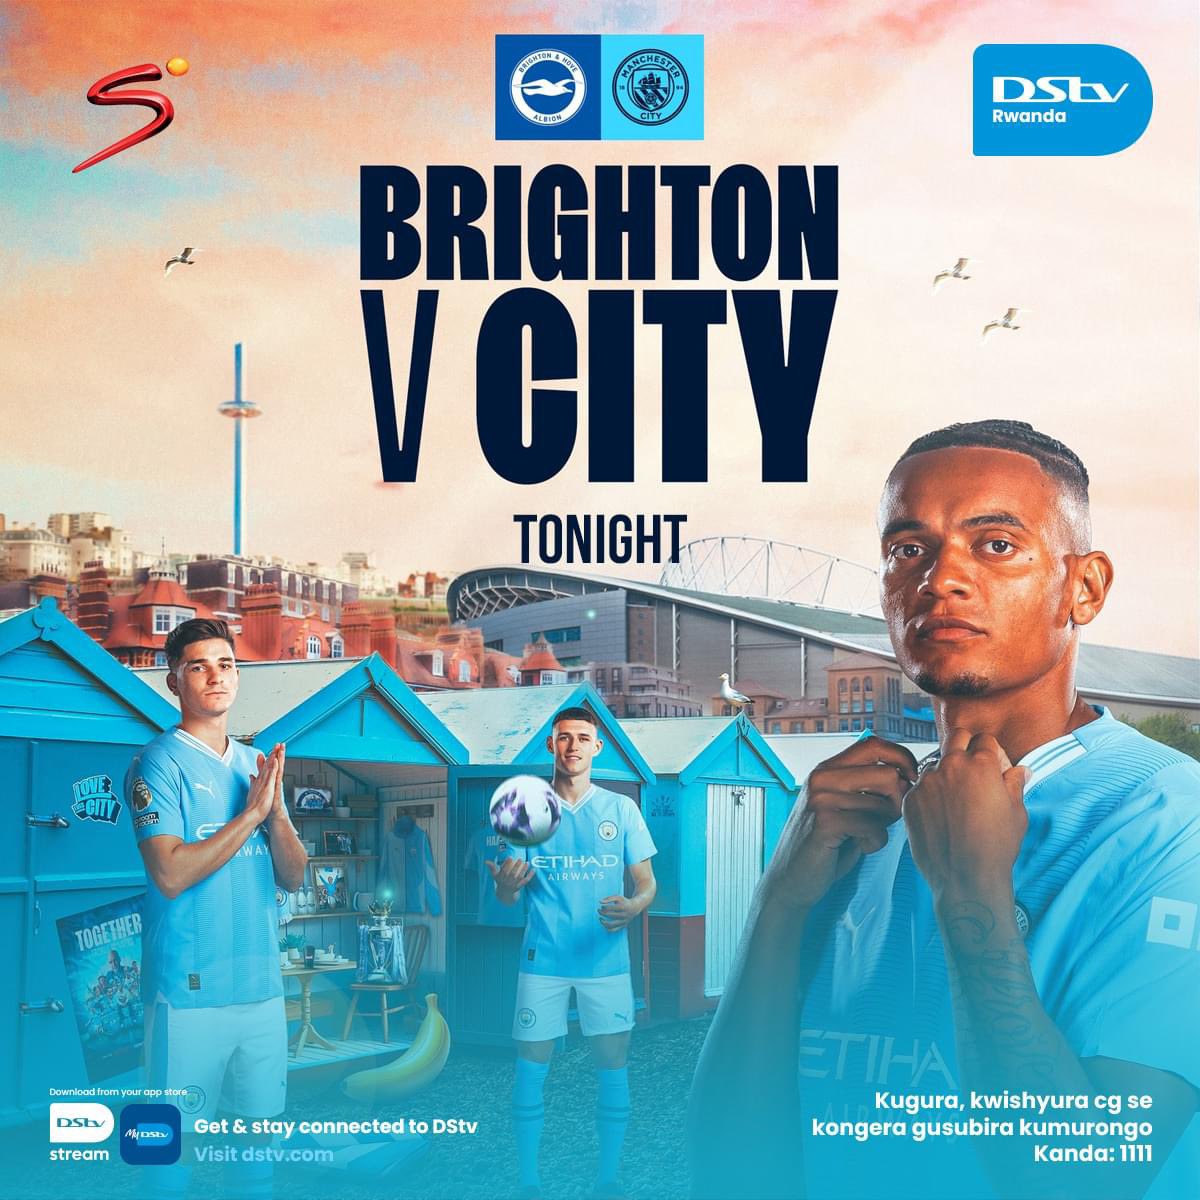 🎉🔥 Get ready for an electrifying clash tonight as Manchester City takes on Brighton in a pivotal match in the race for the EPL title! 🏆⚽